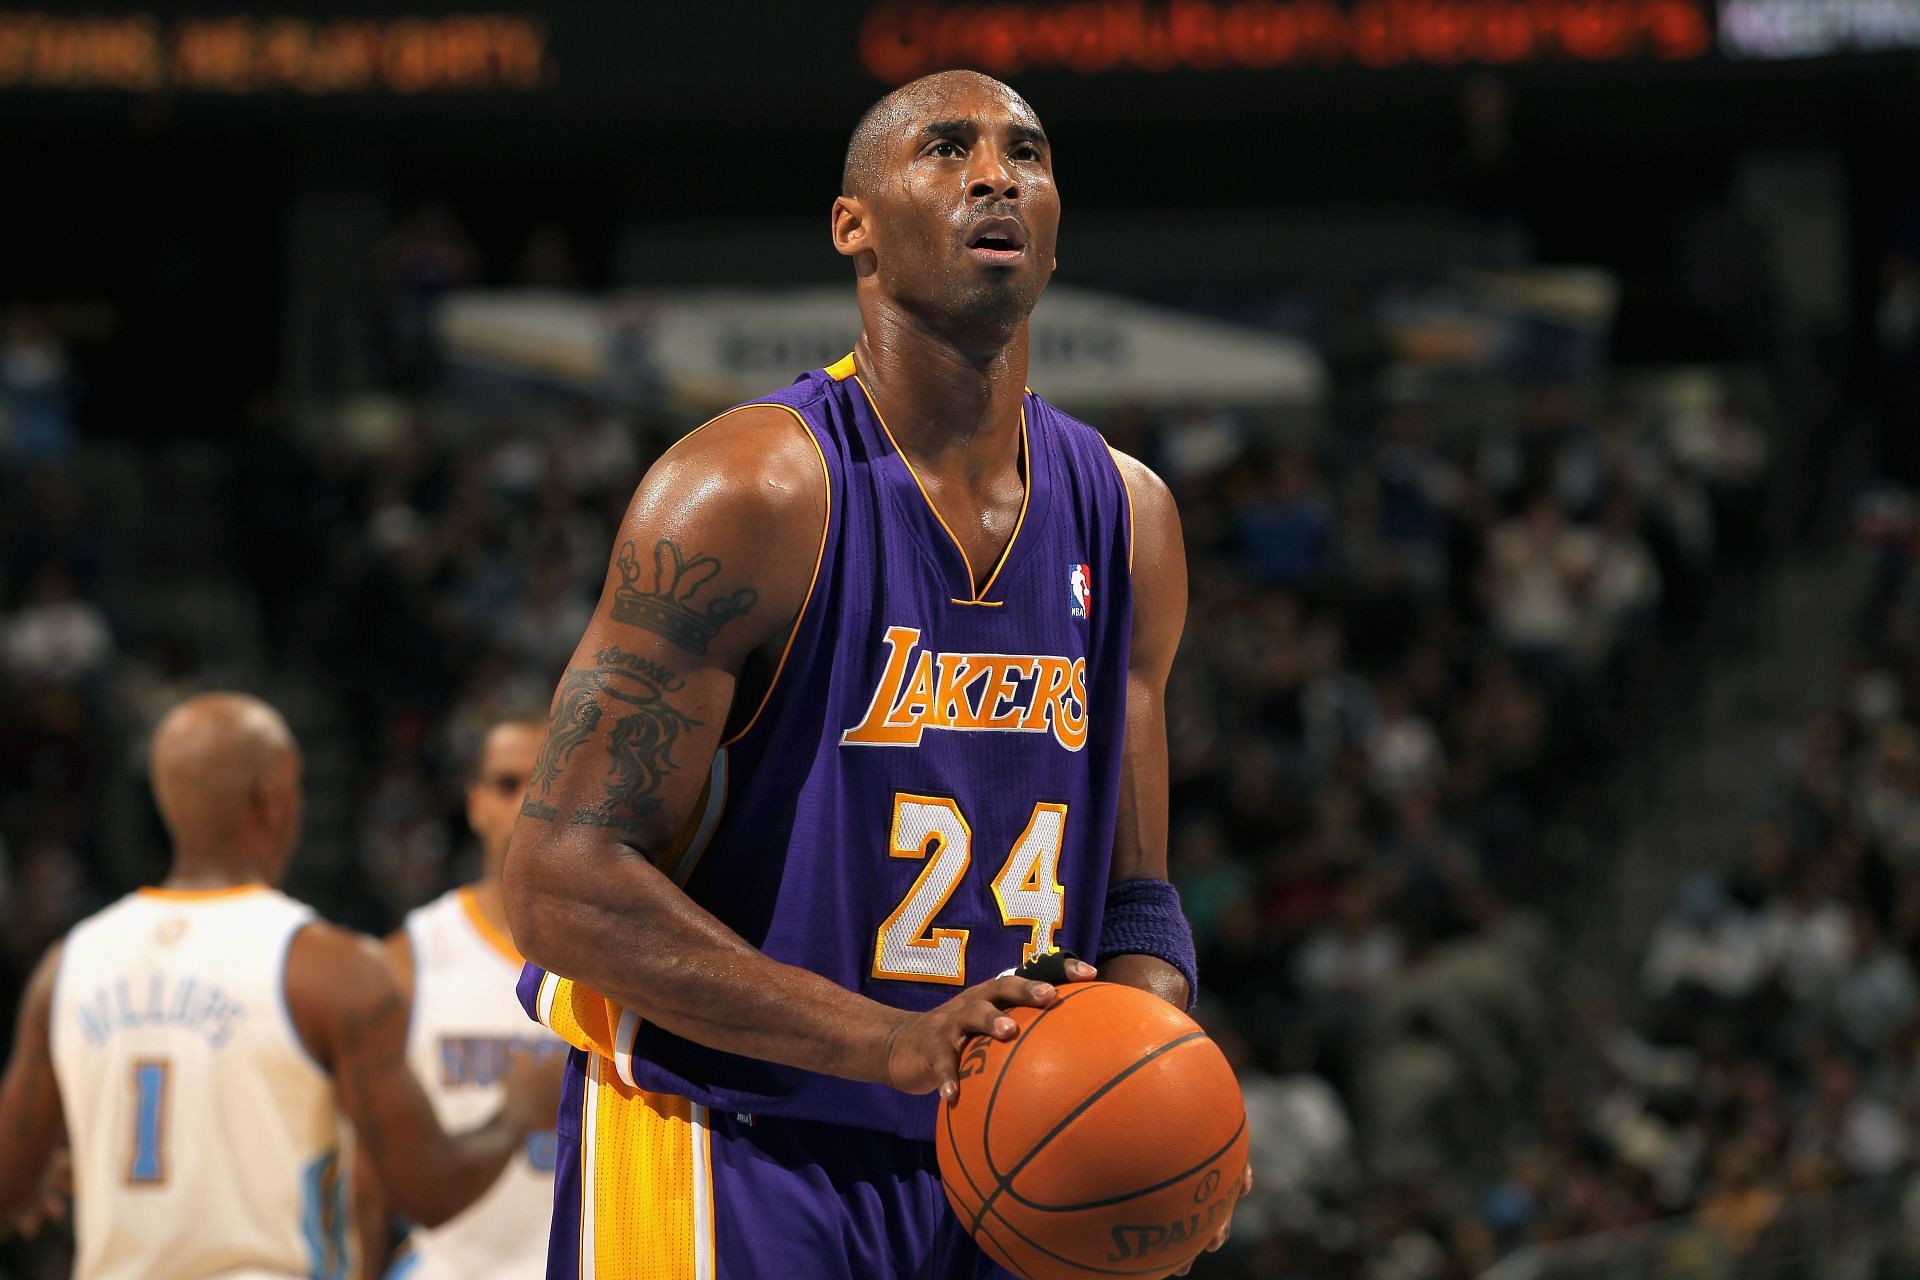 Kobe Bryant #24 of the Los Angeles Lakers takes a free throw against the Denver Nuggets